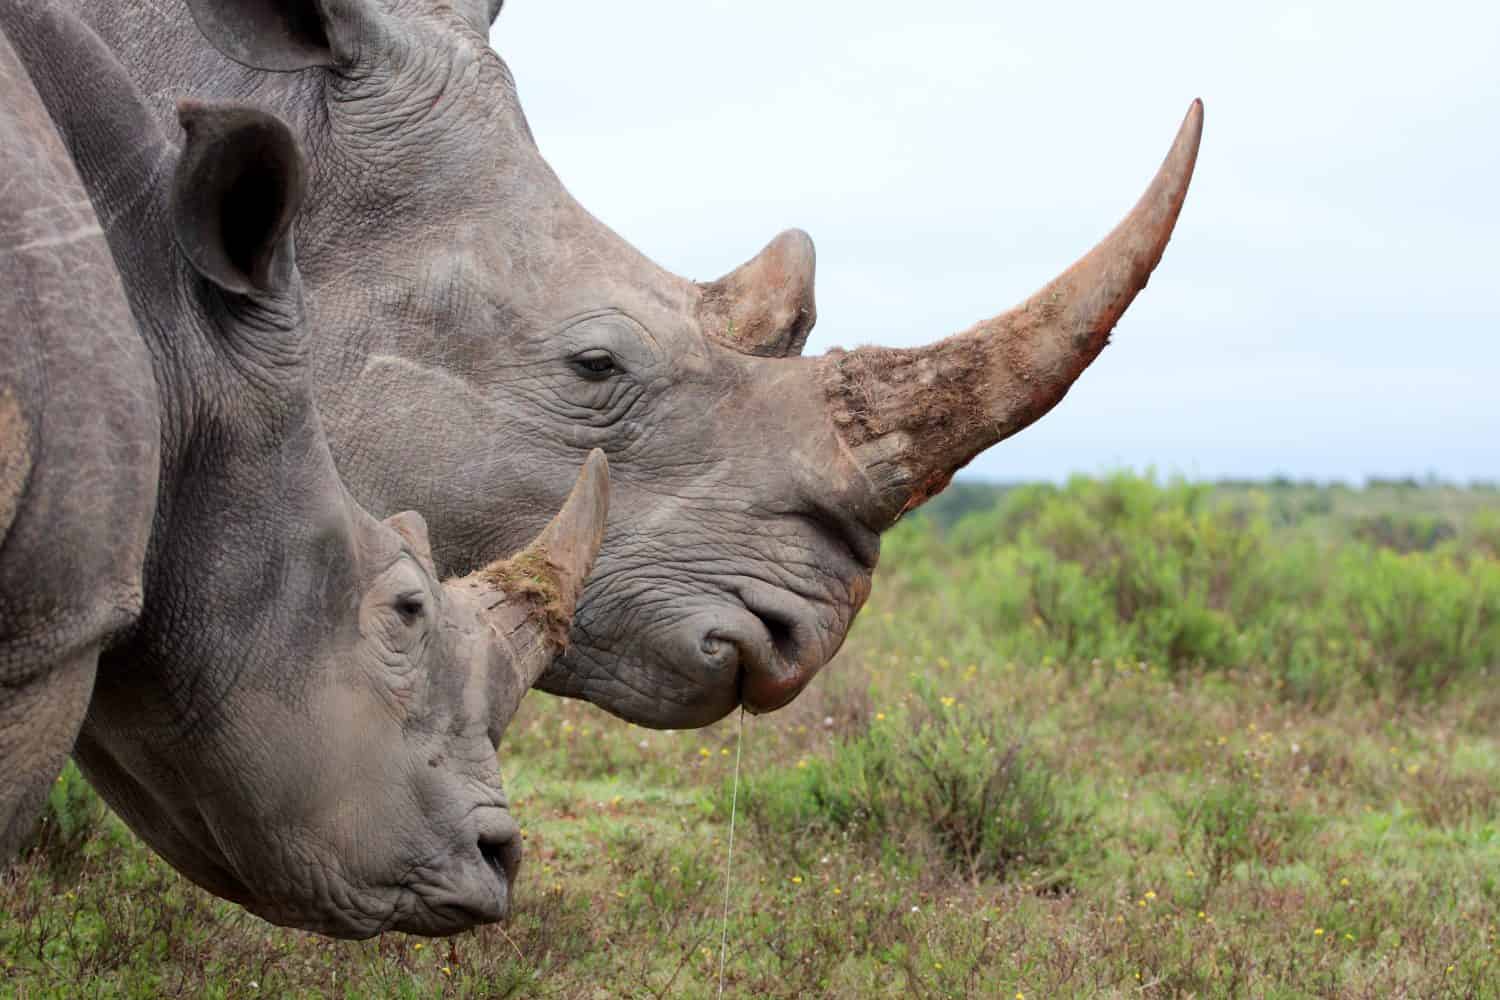 A close up of a female rhino / rhinoceros and her calf. Showing off her beautiful horn. Protecting her calf. South Africa